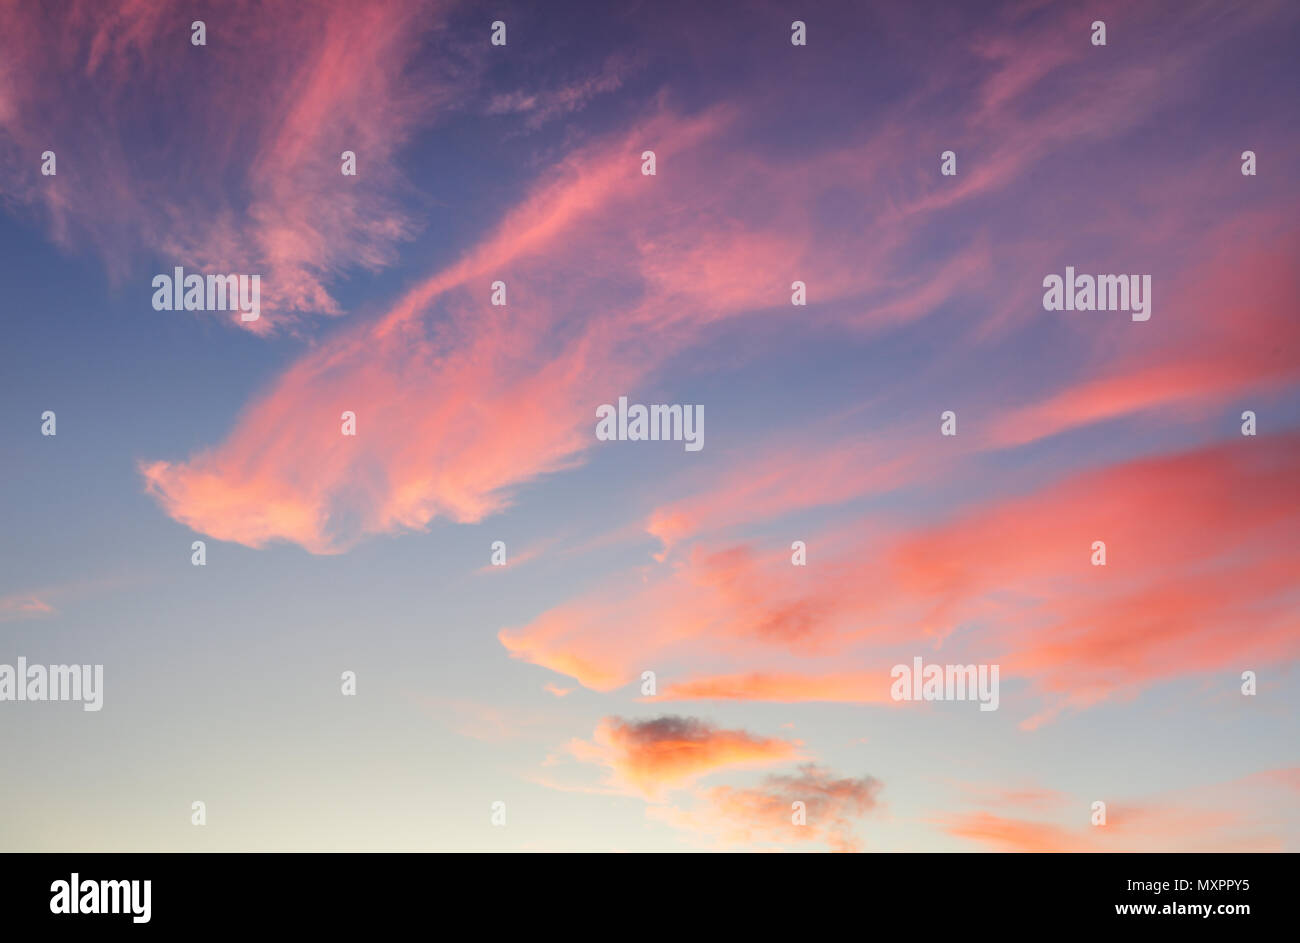 Red sky with blue clouds Stock Photo - Alamy